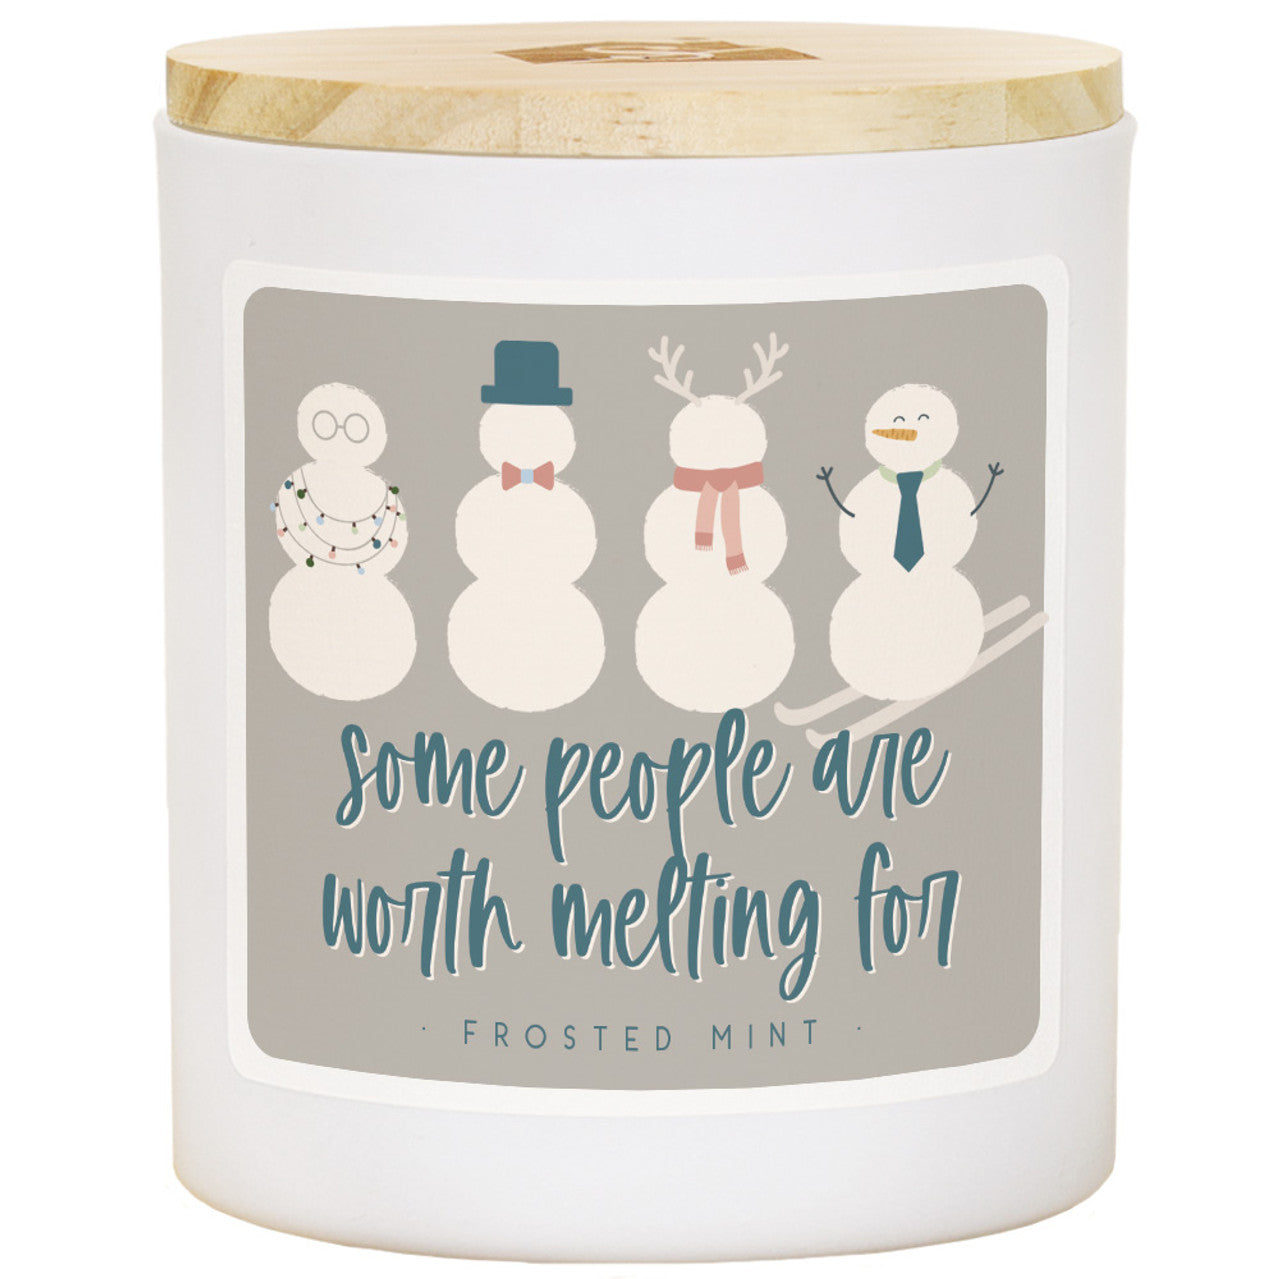 Some People Are Worth Melting For - Frosted Mint Candle - 11 oz. - Mellow Monkey